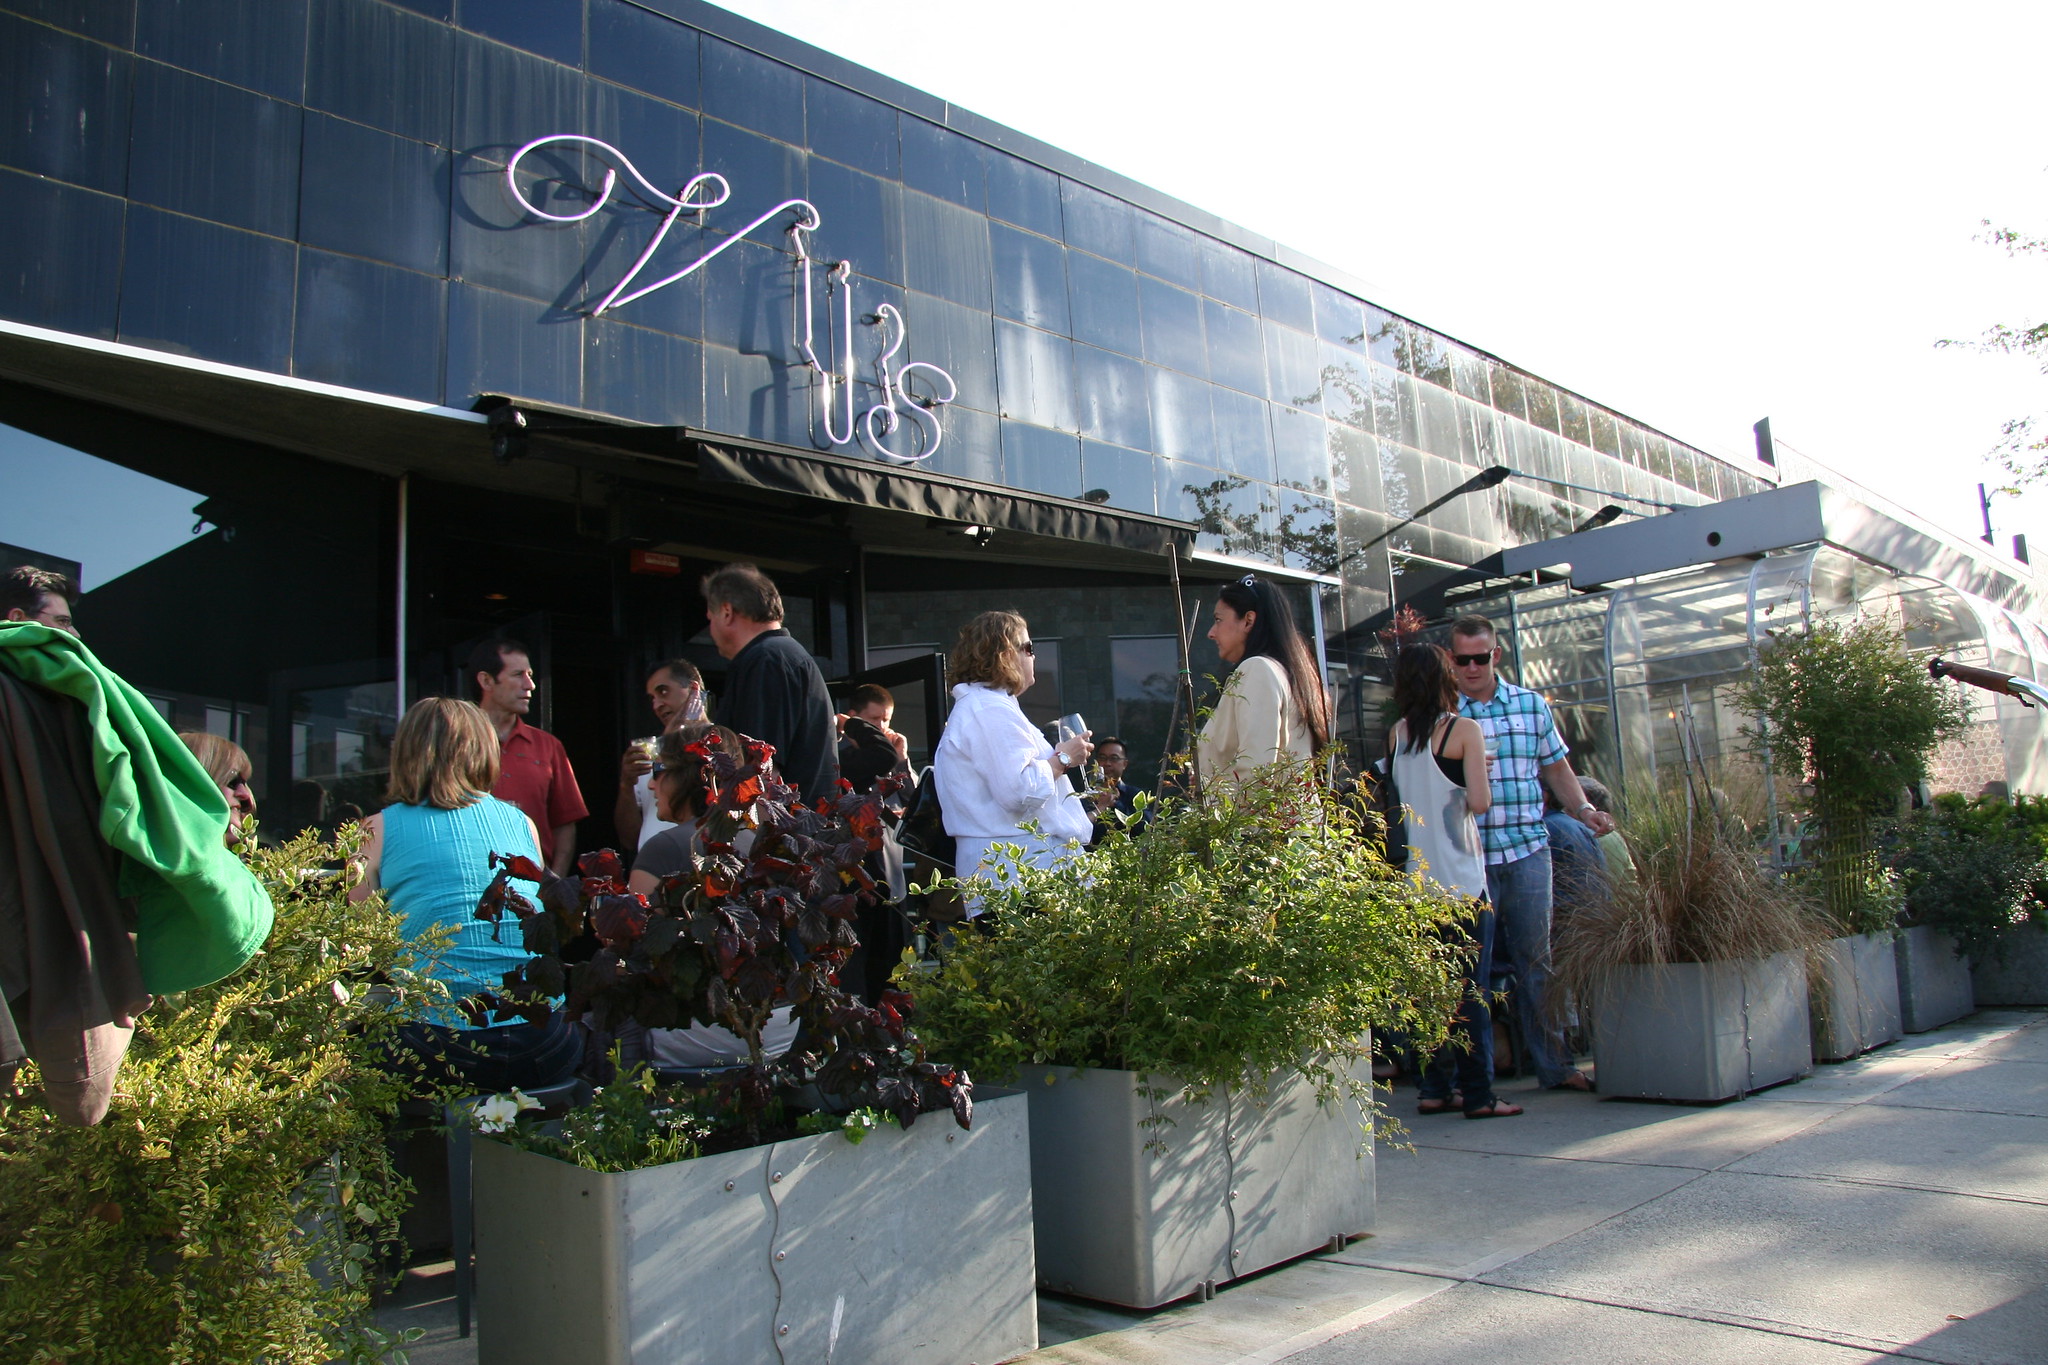 Many people line up outside a chic modern restaurant.